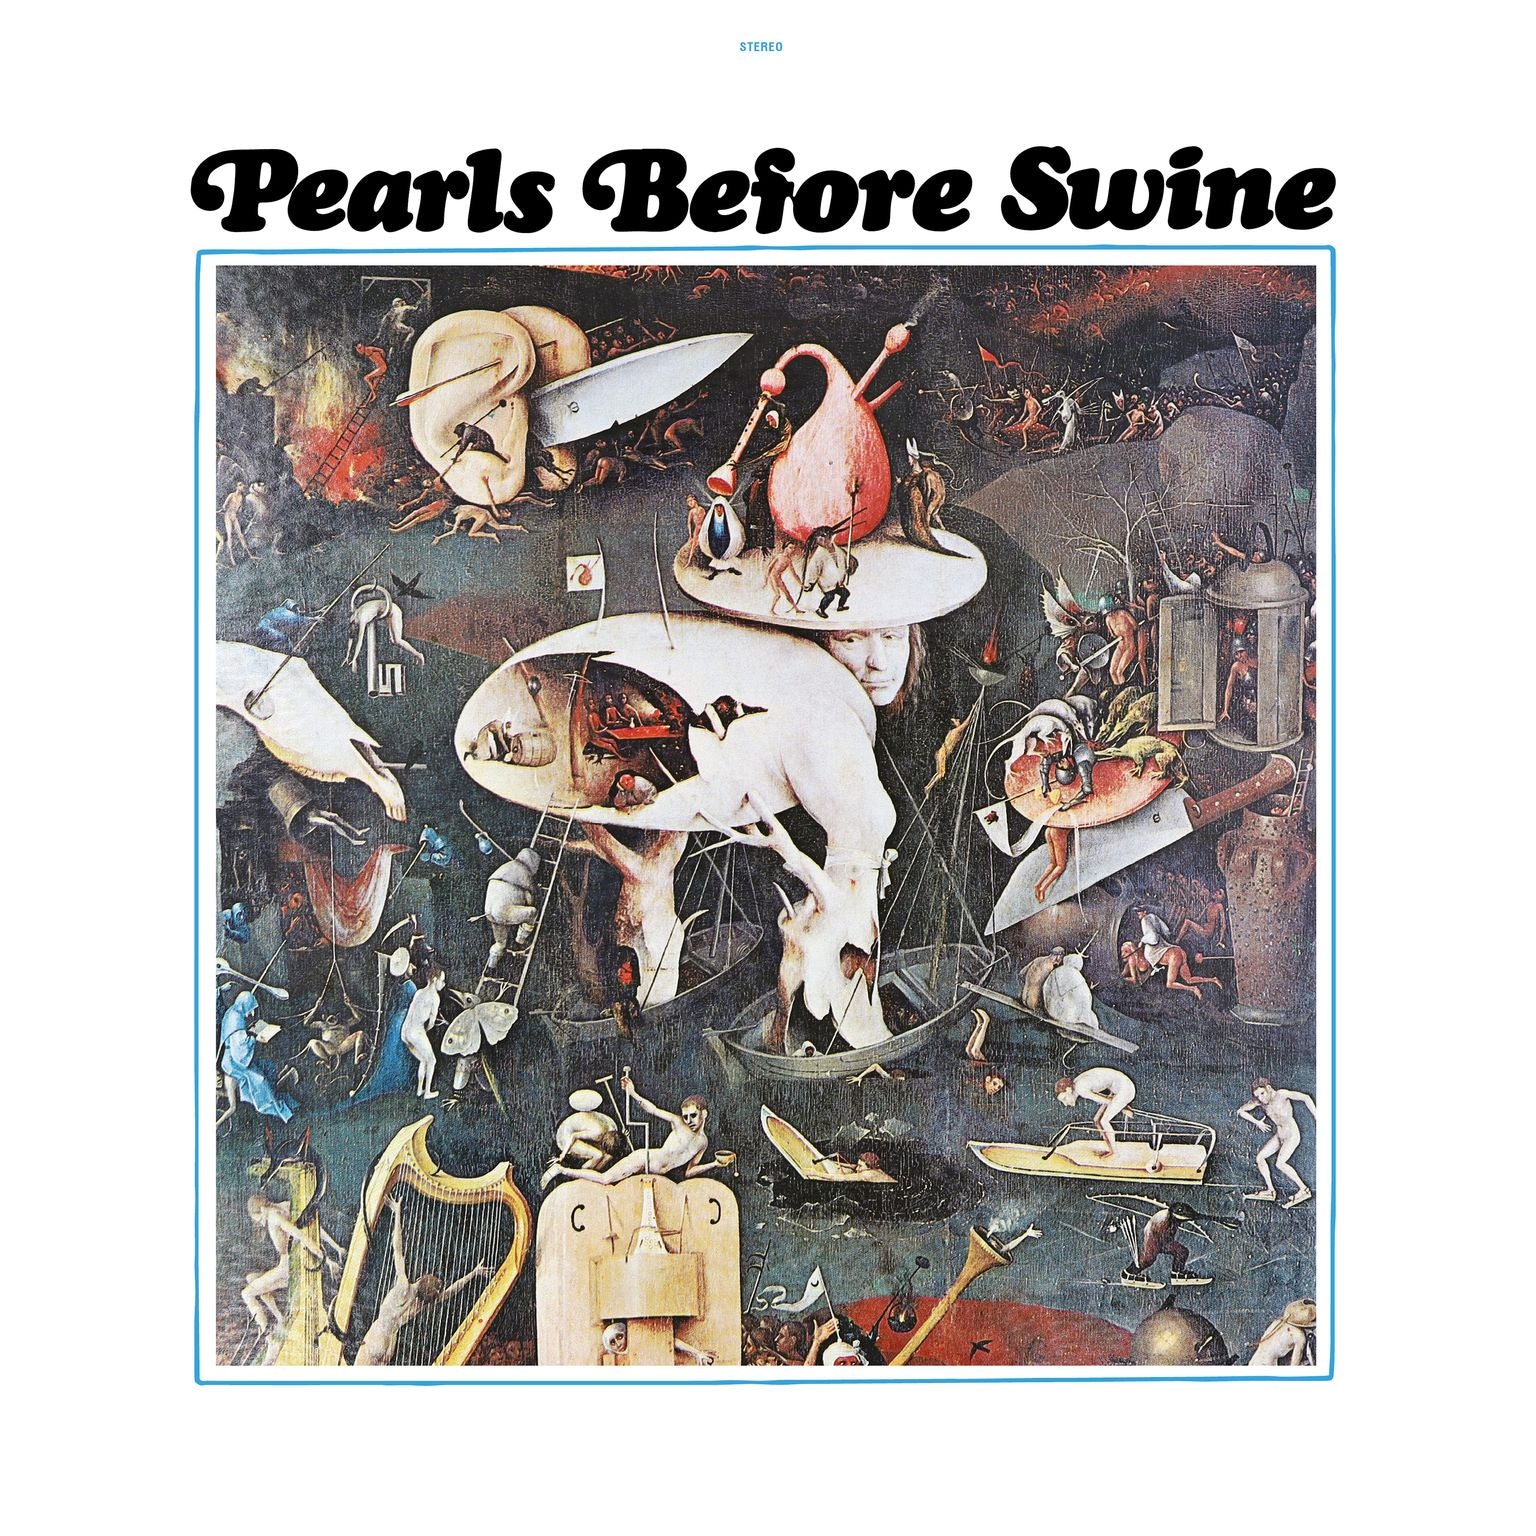 PEARLS BEFORE SWINE - One Nation Underground (Remastered & Expanded) - 2LP - Vinyl [RSD23]